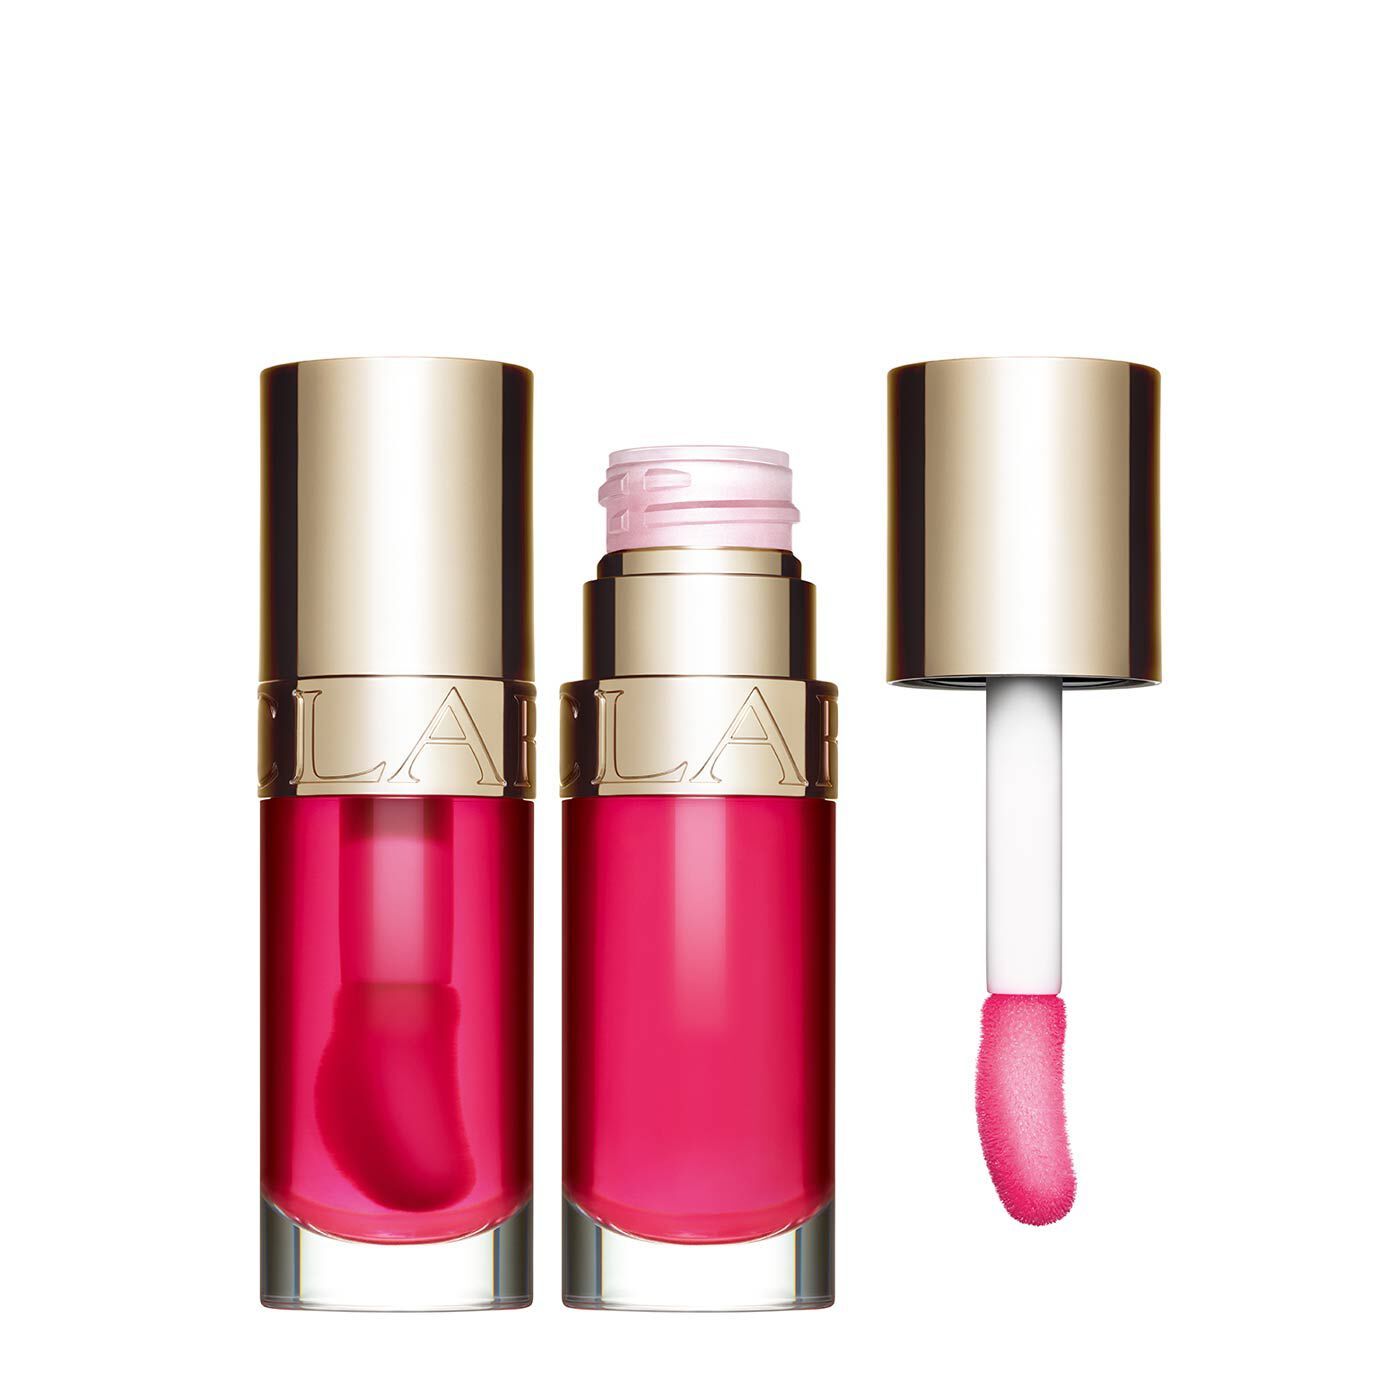 Clarins Lip Comfort Oil Hydrating and Plumping Lip Oil 0.2 Oz. - 04 pitaya | Clarins USA